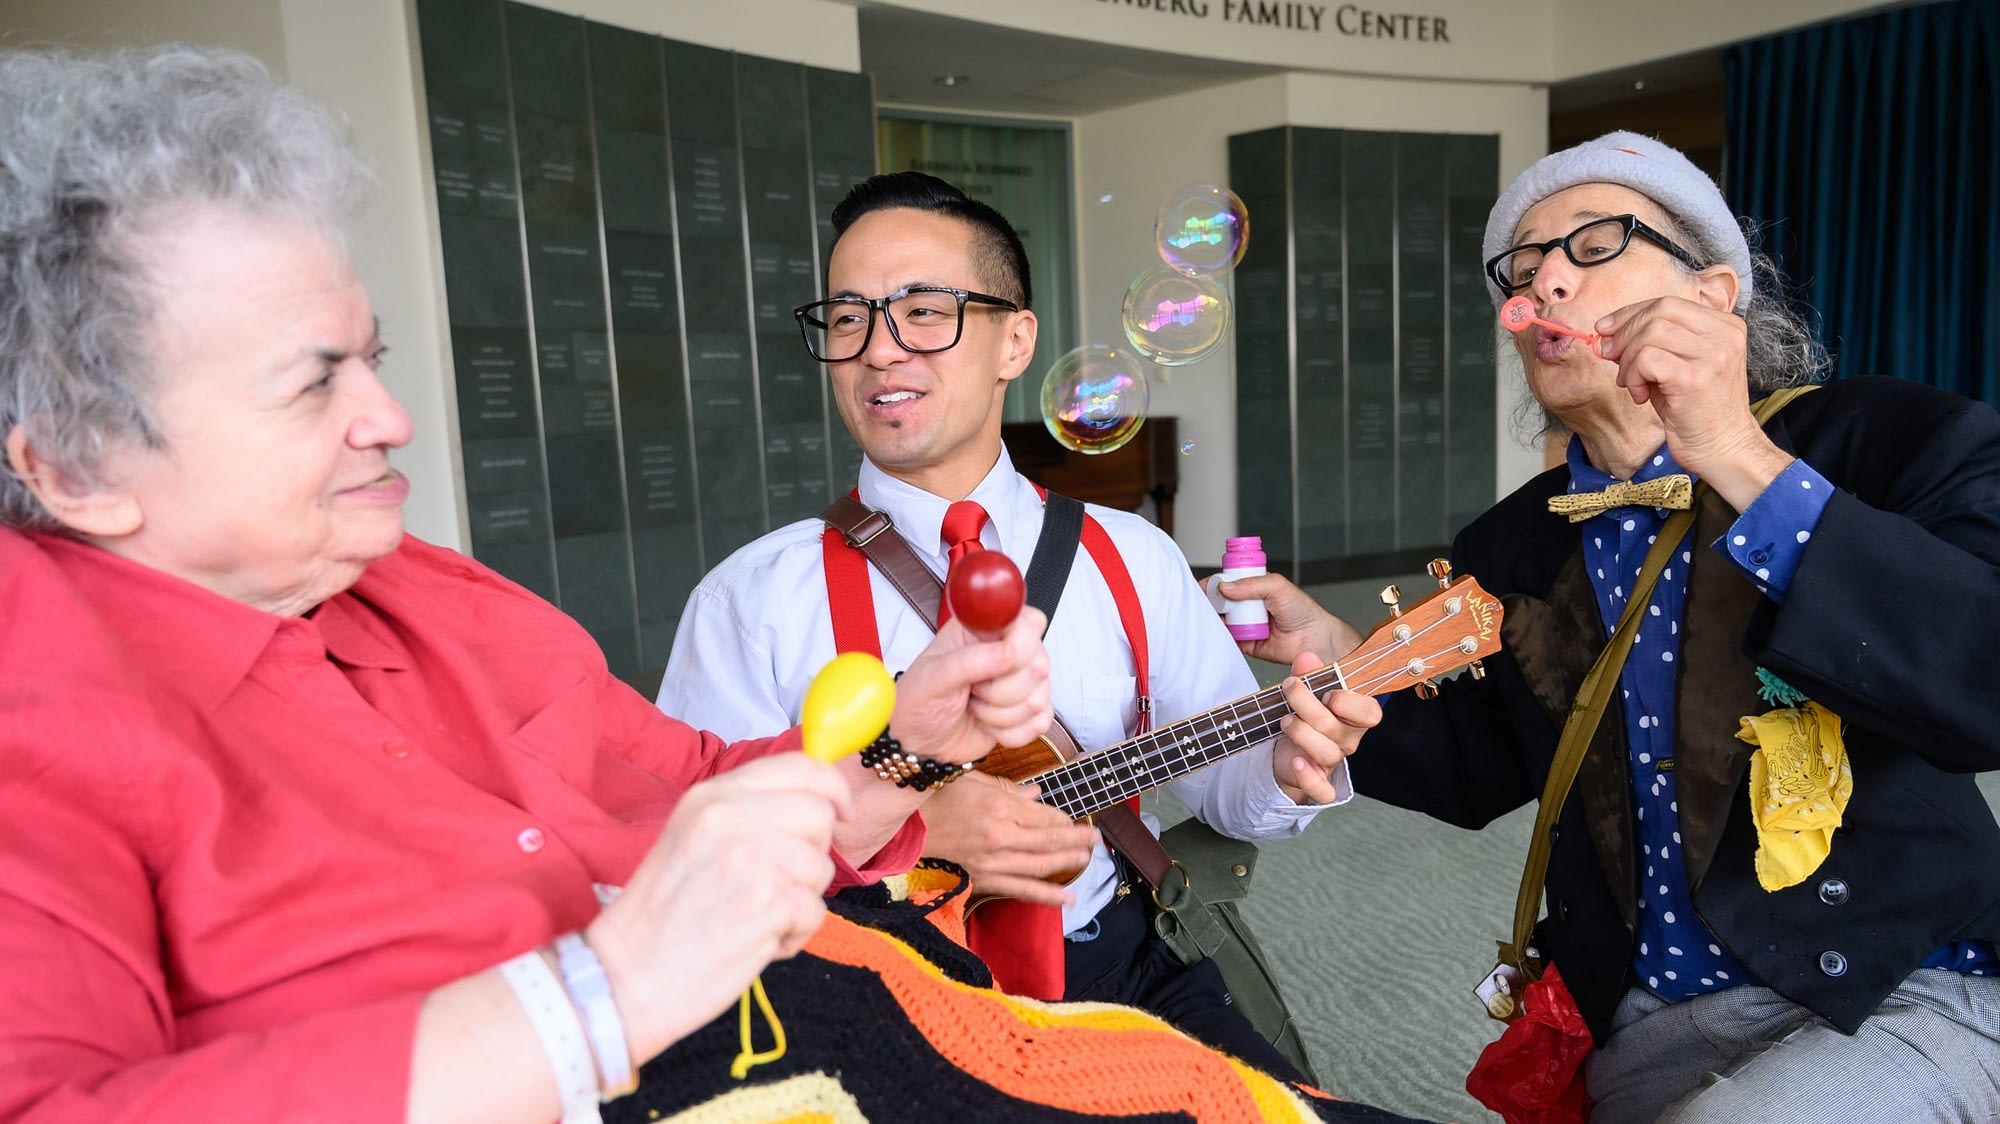 Image: Medical clowns playing music with a senior patient!